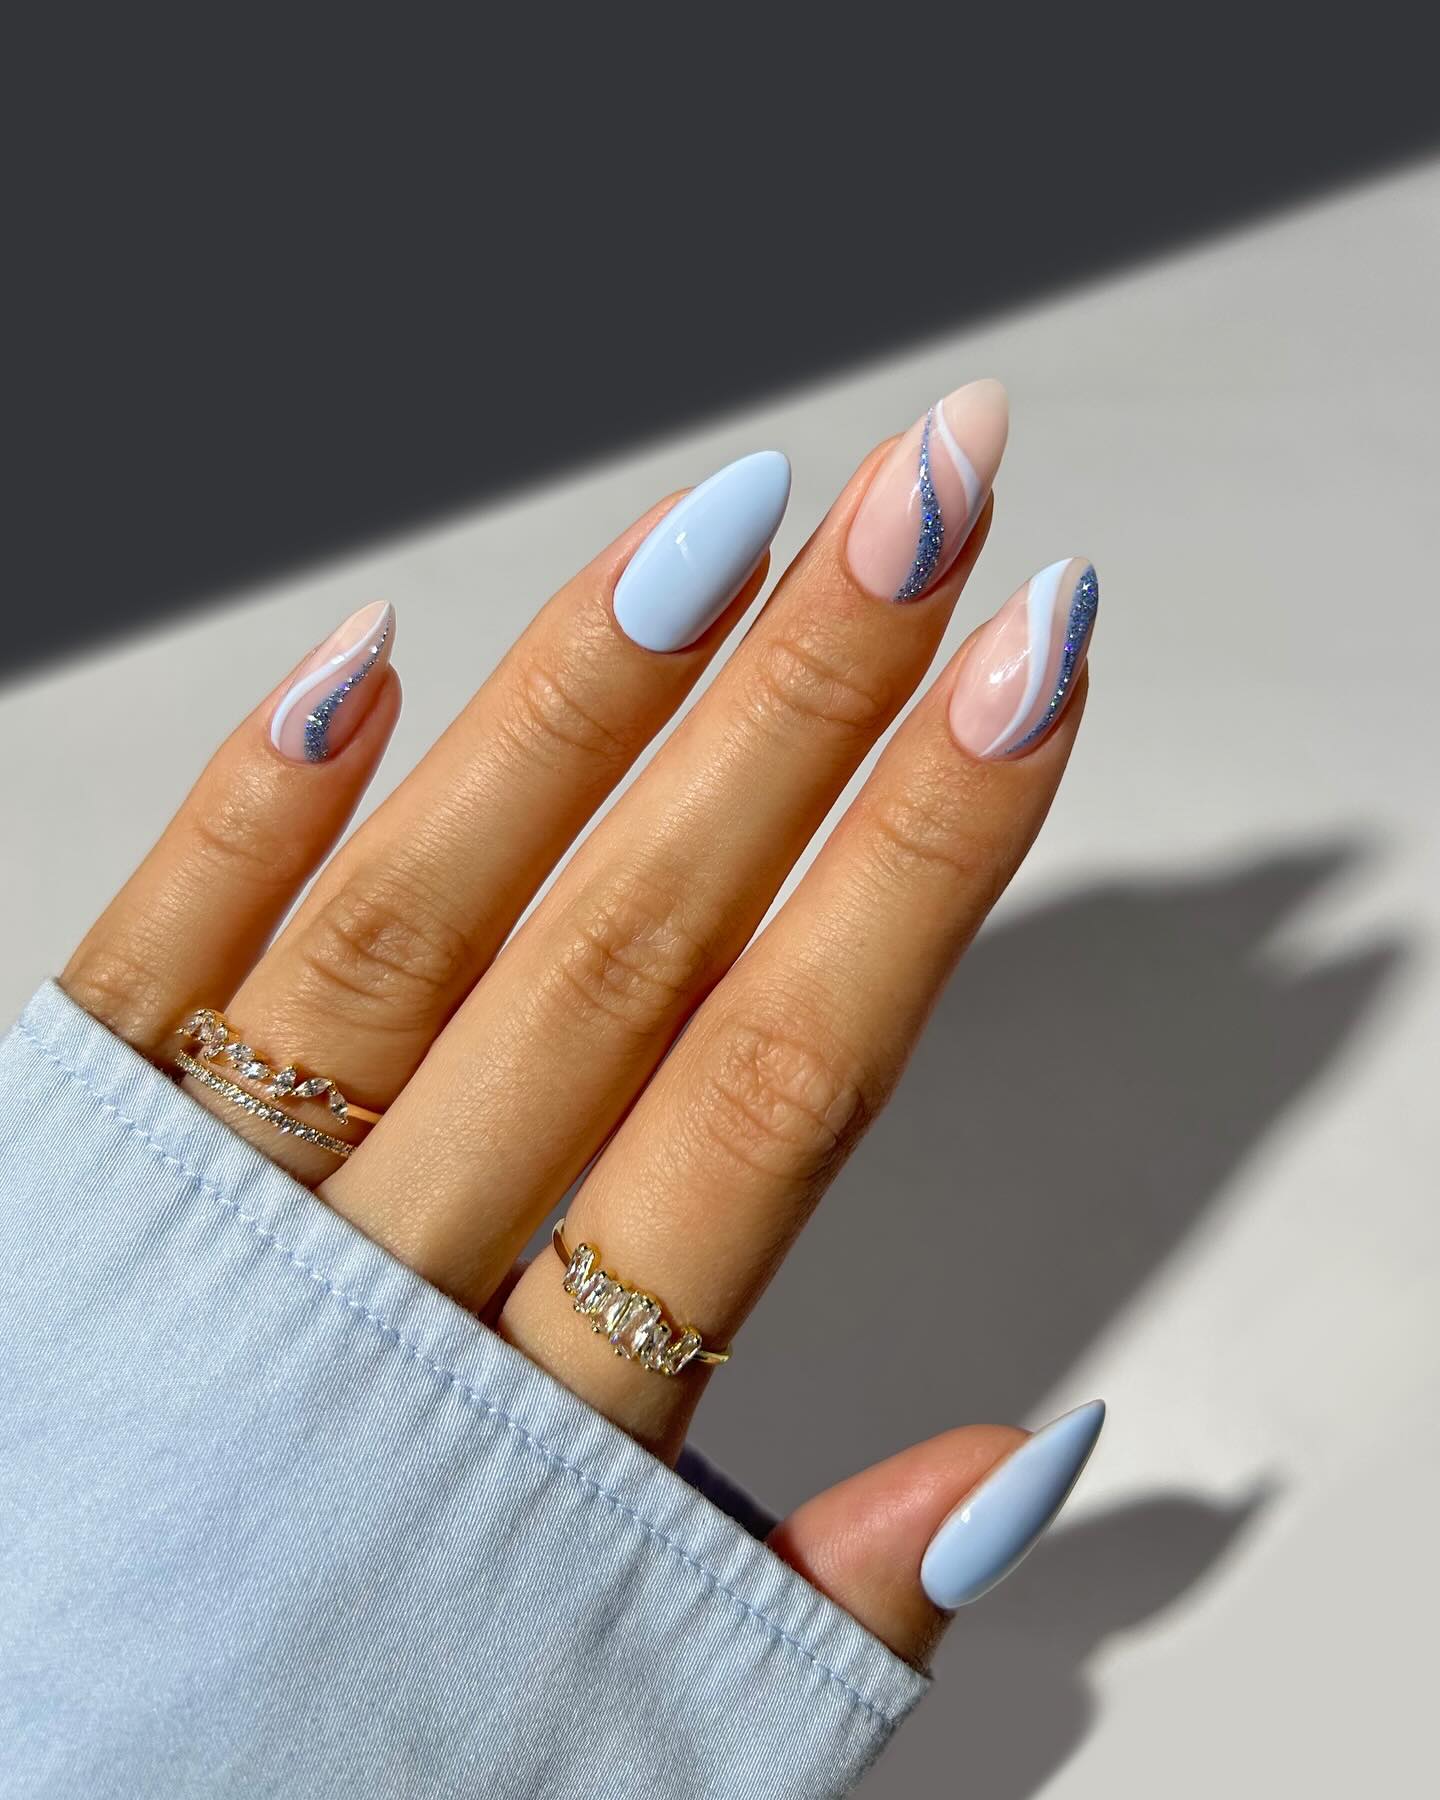 100 Of The Best Spring Inspired Nail Designs images 86